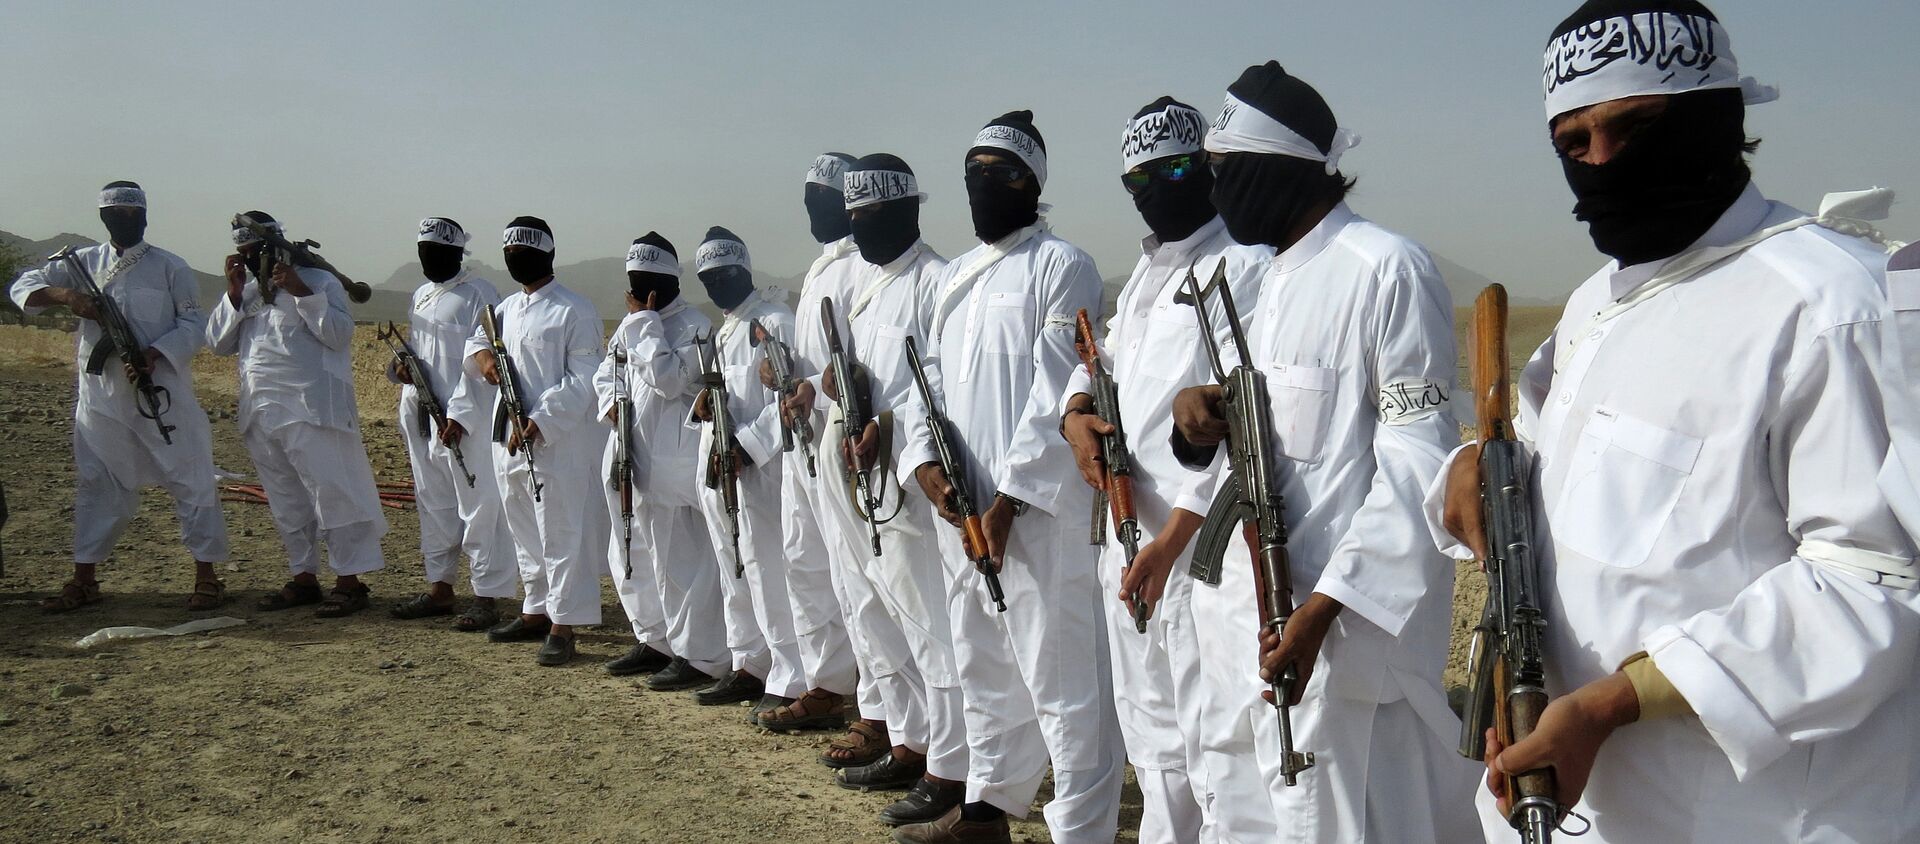 File, In this Aug. 15, 2016 photo, Taliban suicide bombers stand guard during a gathering of a breakaway Taliban faction, in the border area of Zabul province, Afghanistan - Sputnik International, 1920, 09.07.2021